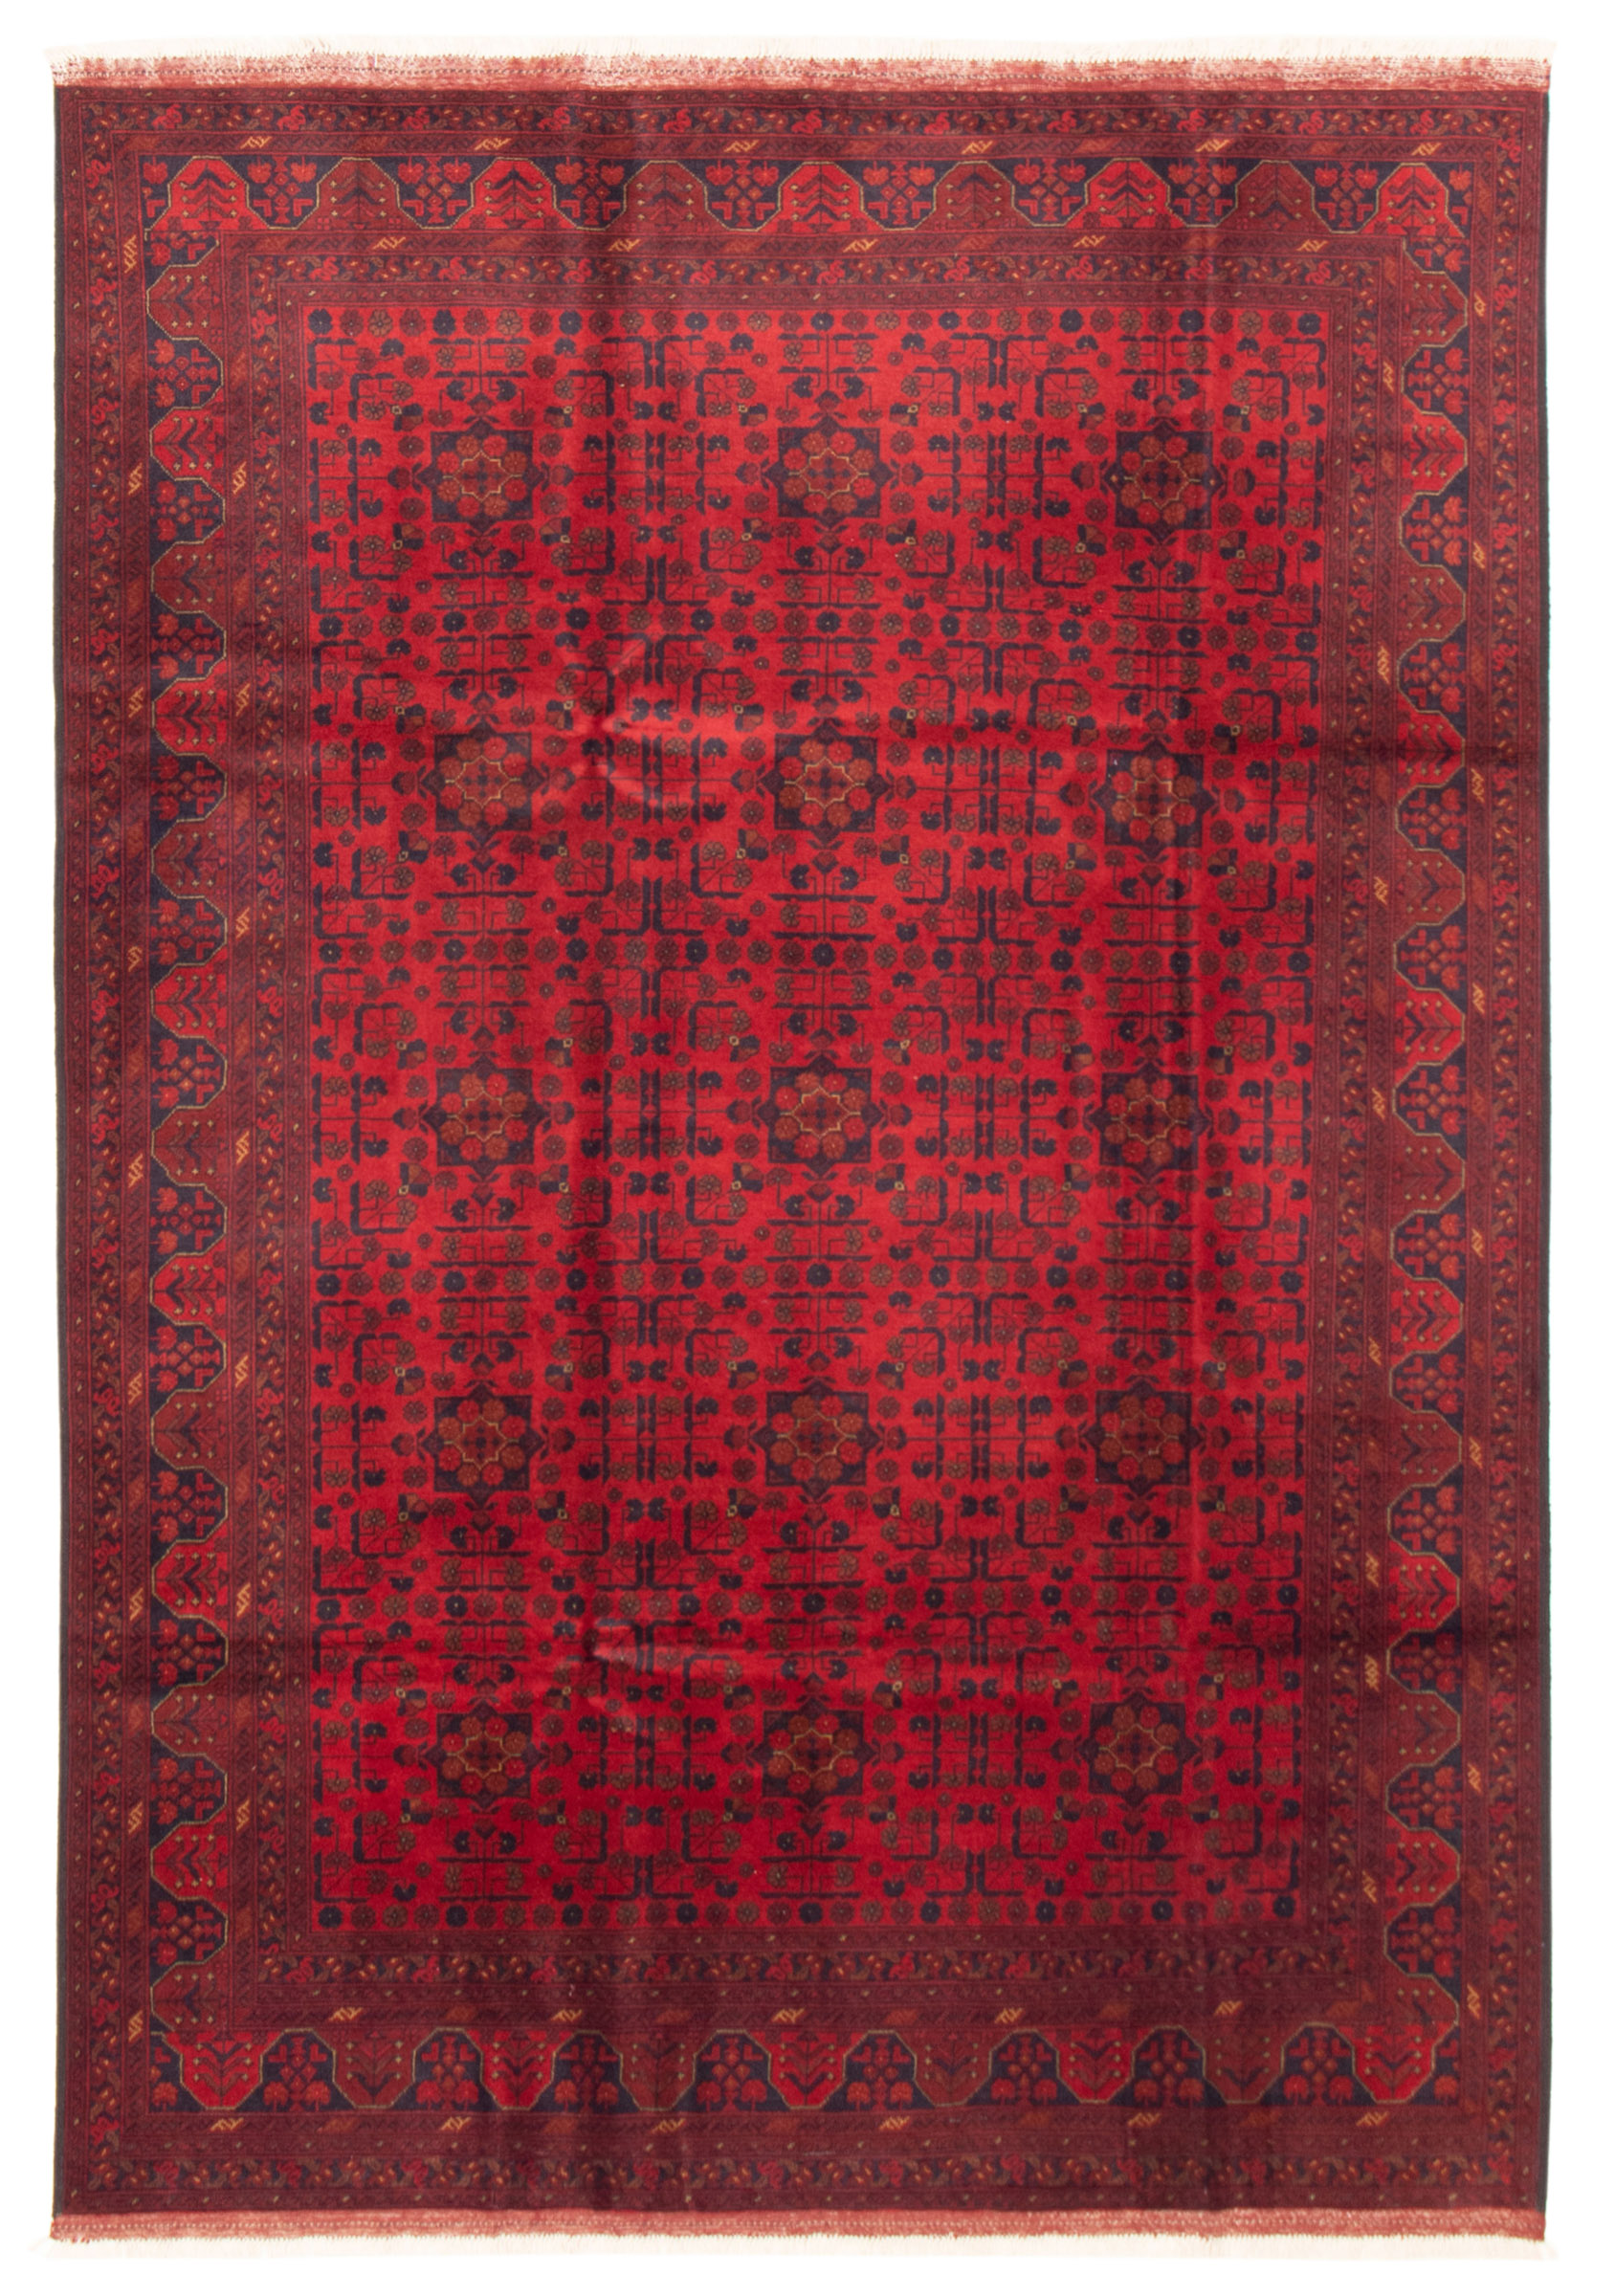 eCarpet Gallery Area Rug for Living Room 328693 Hand-Knotted Wool Rug Finest Khal Mohammadi Bordered Red Rug 4'0 x 6'2 Bedroom 